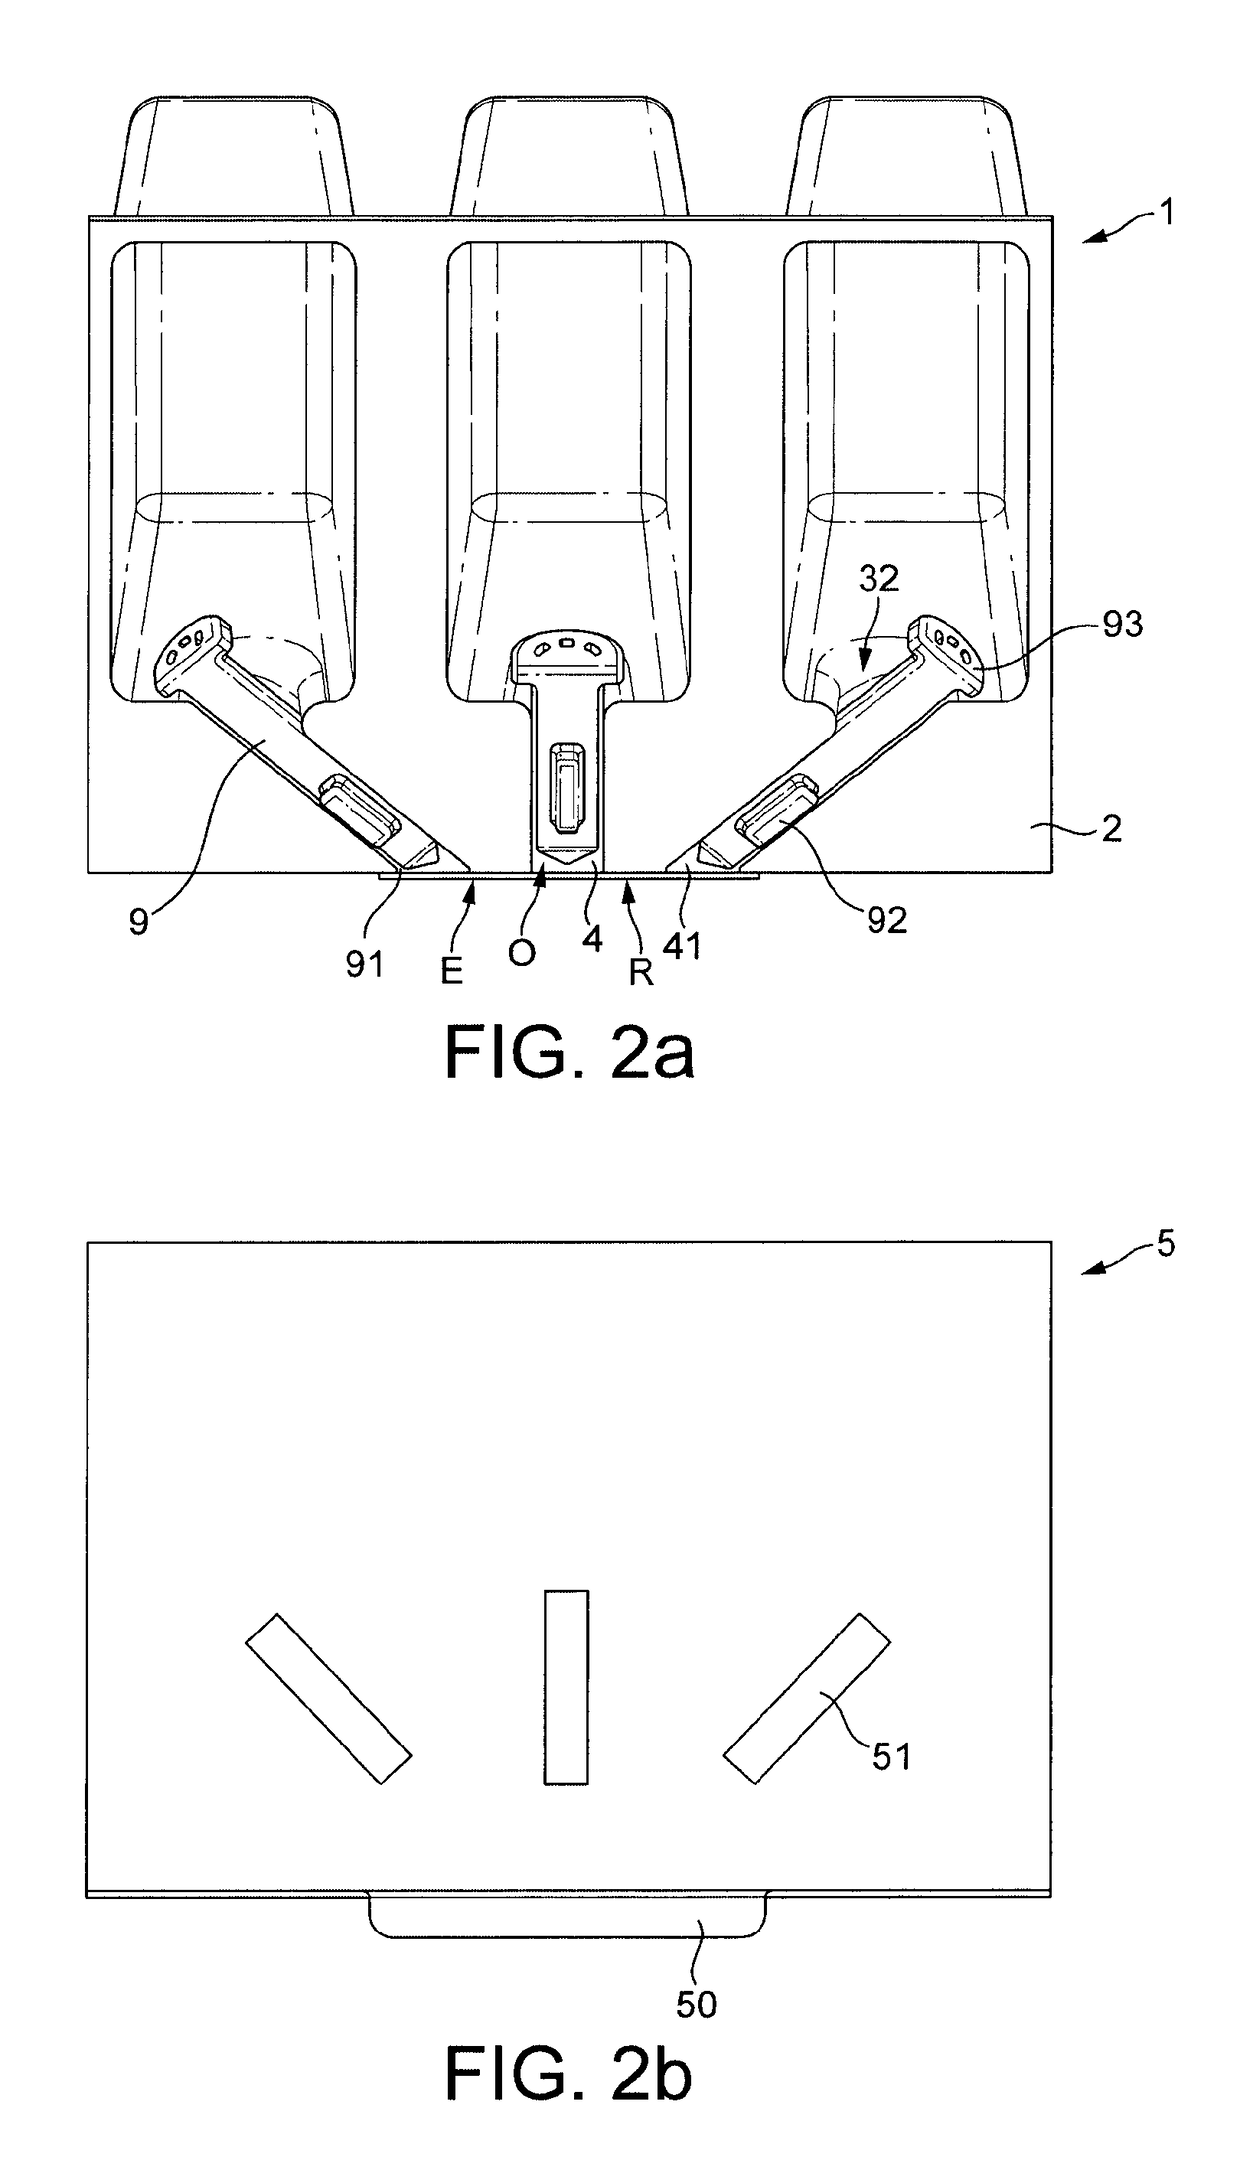 Food or beverage card comprising an actuator